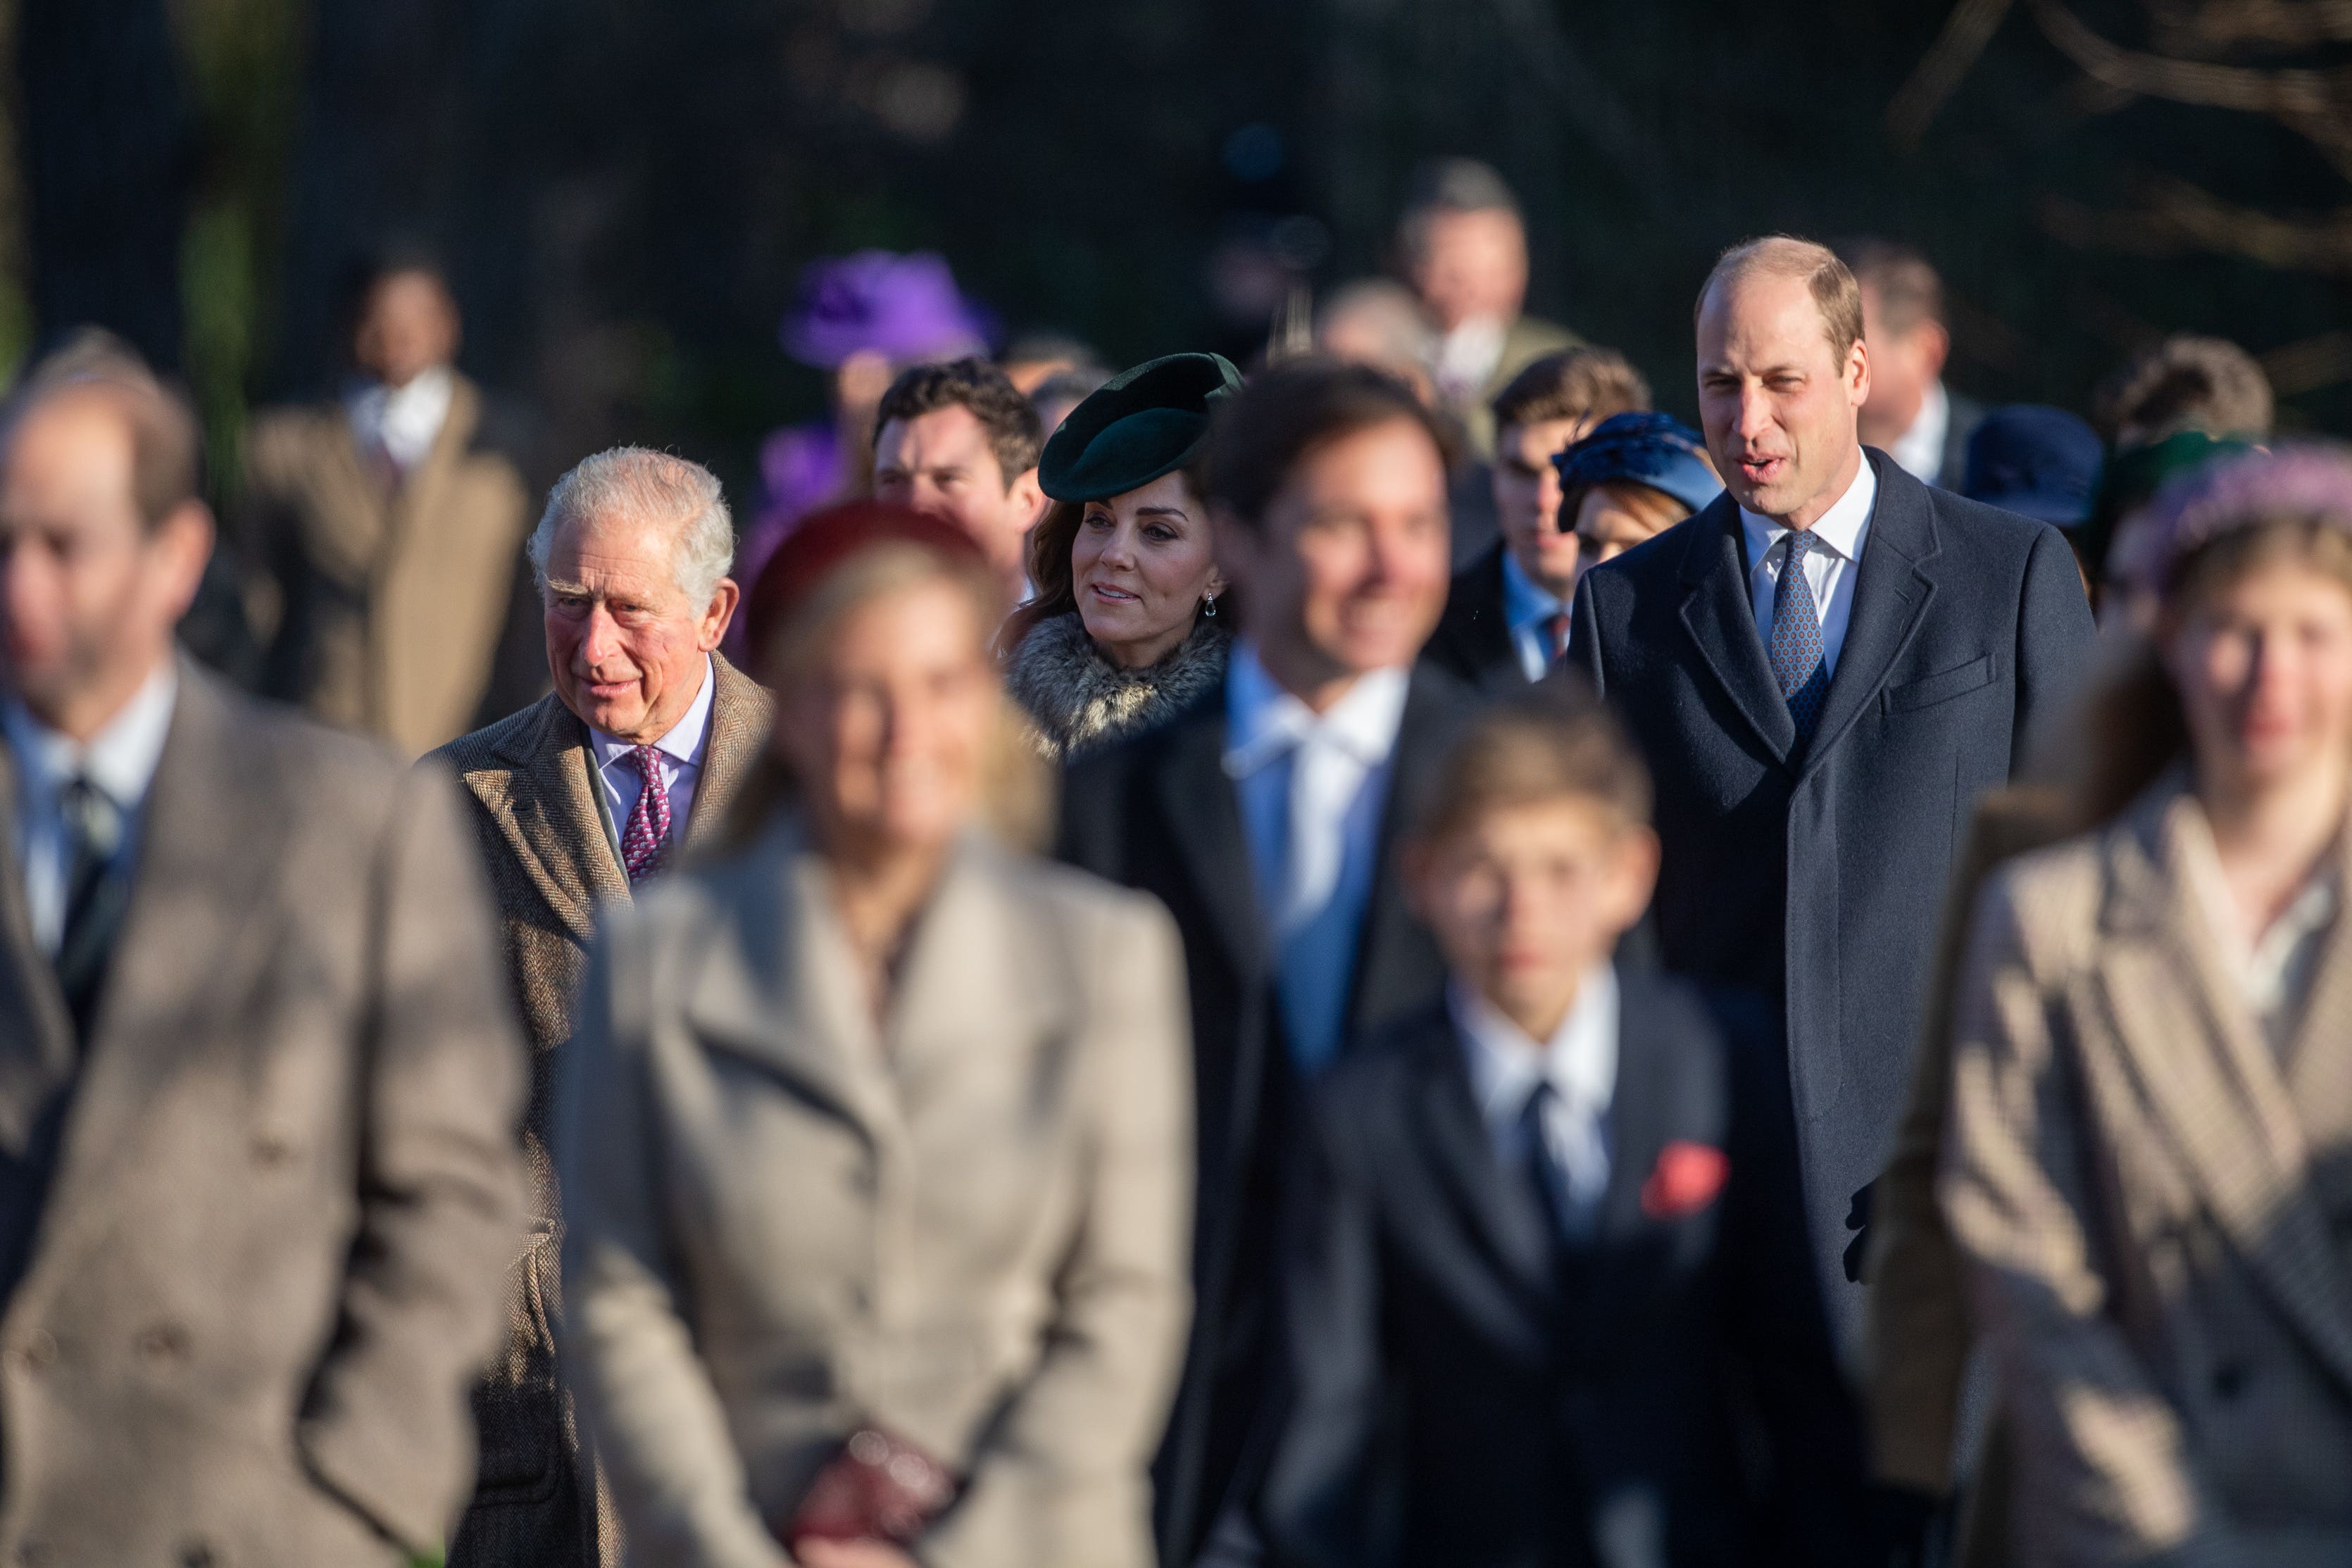 The Prince of Wales, Duchess of Cambridge and Duke of Cambridge arriving to attend the Christmas Day morning church service at St Mary Magdalene Church in Sandringham, Norfolk.